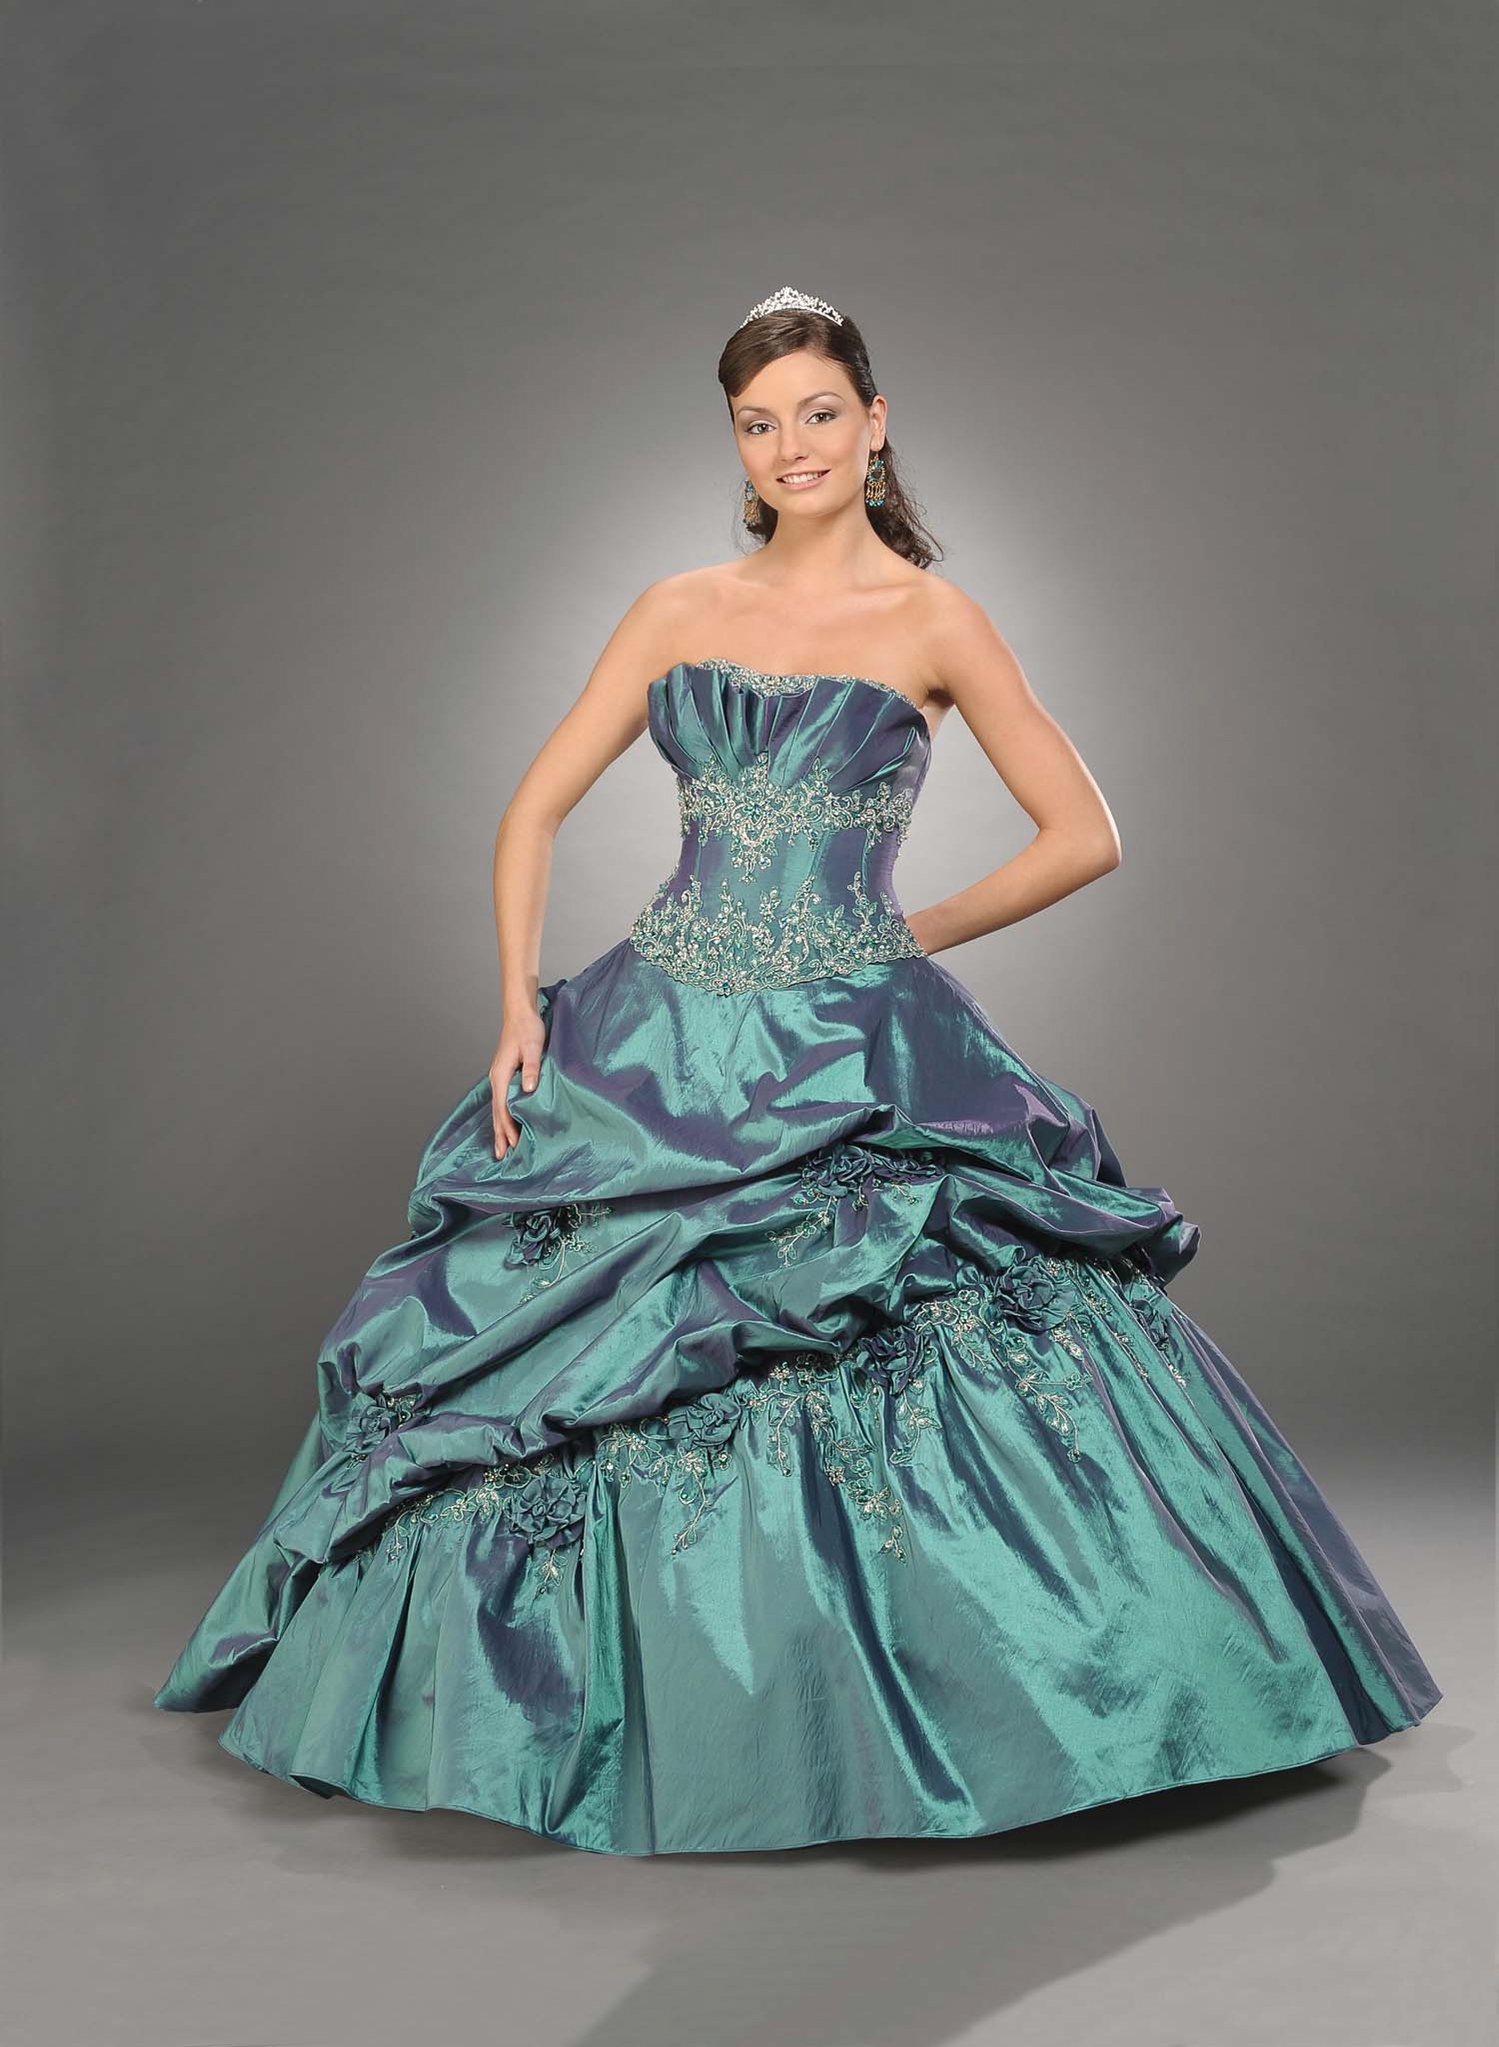 Teal Ball Gown Strapless Full Length Quinceanera Dresses With Beading And Twist Draped 